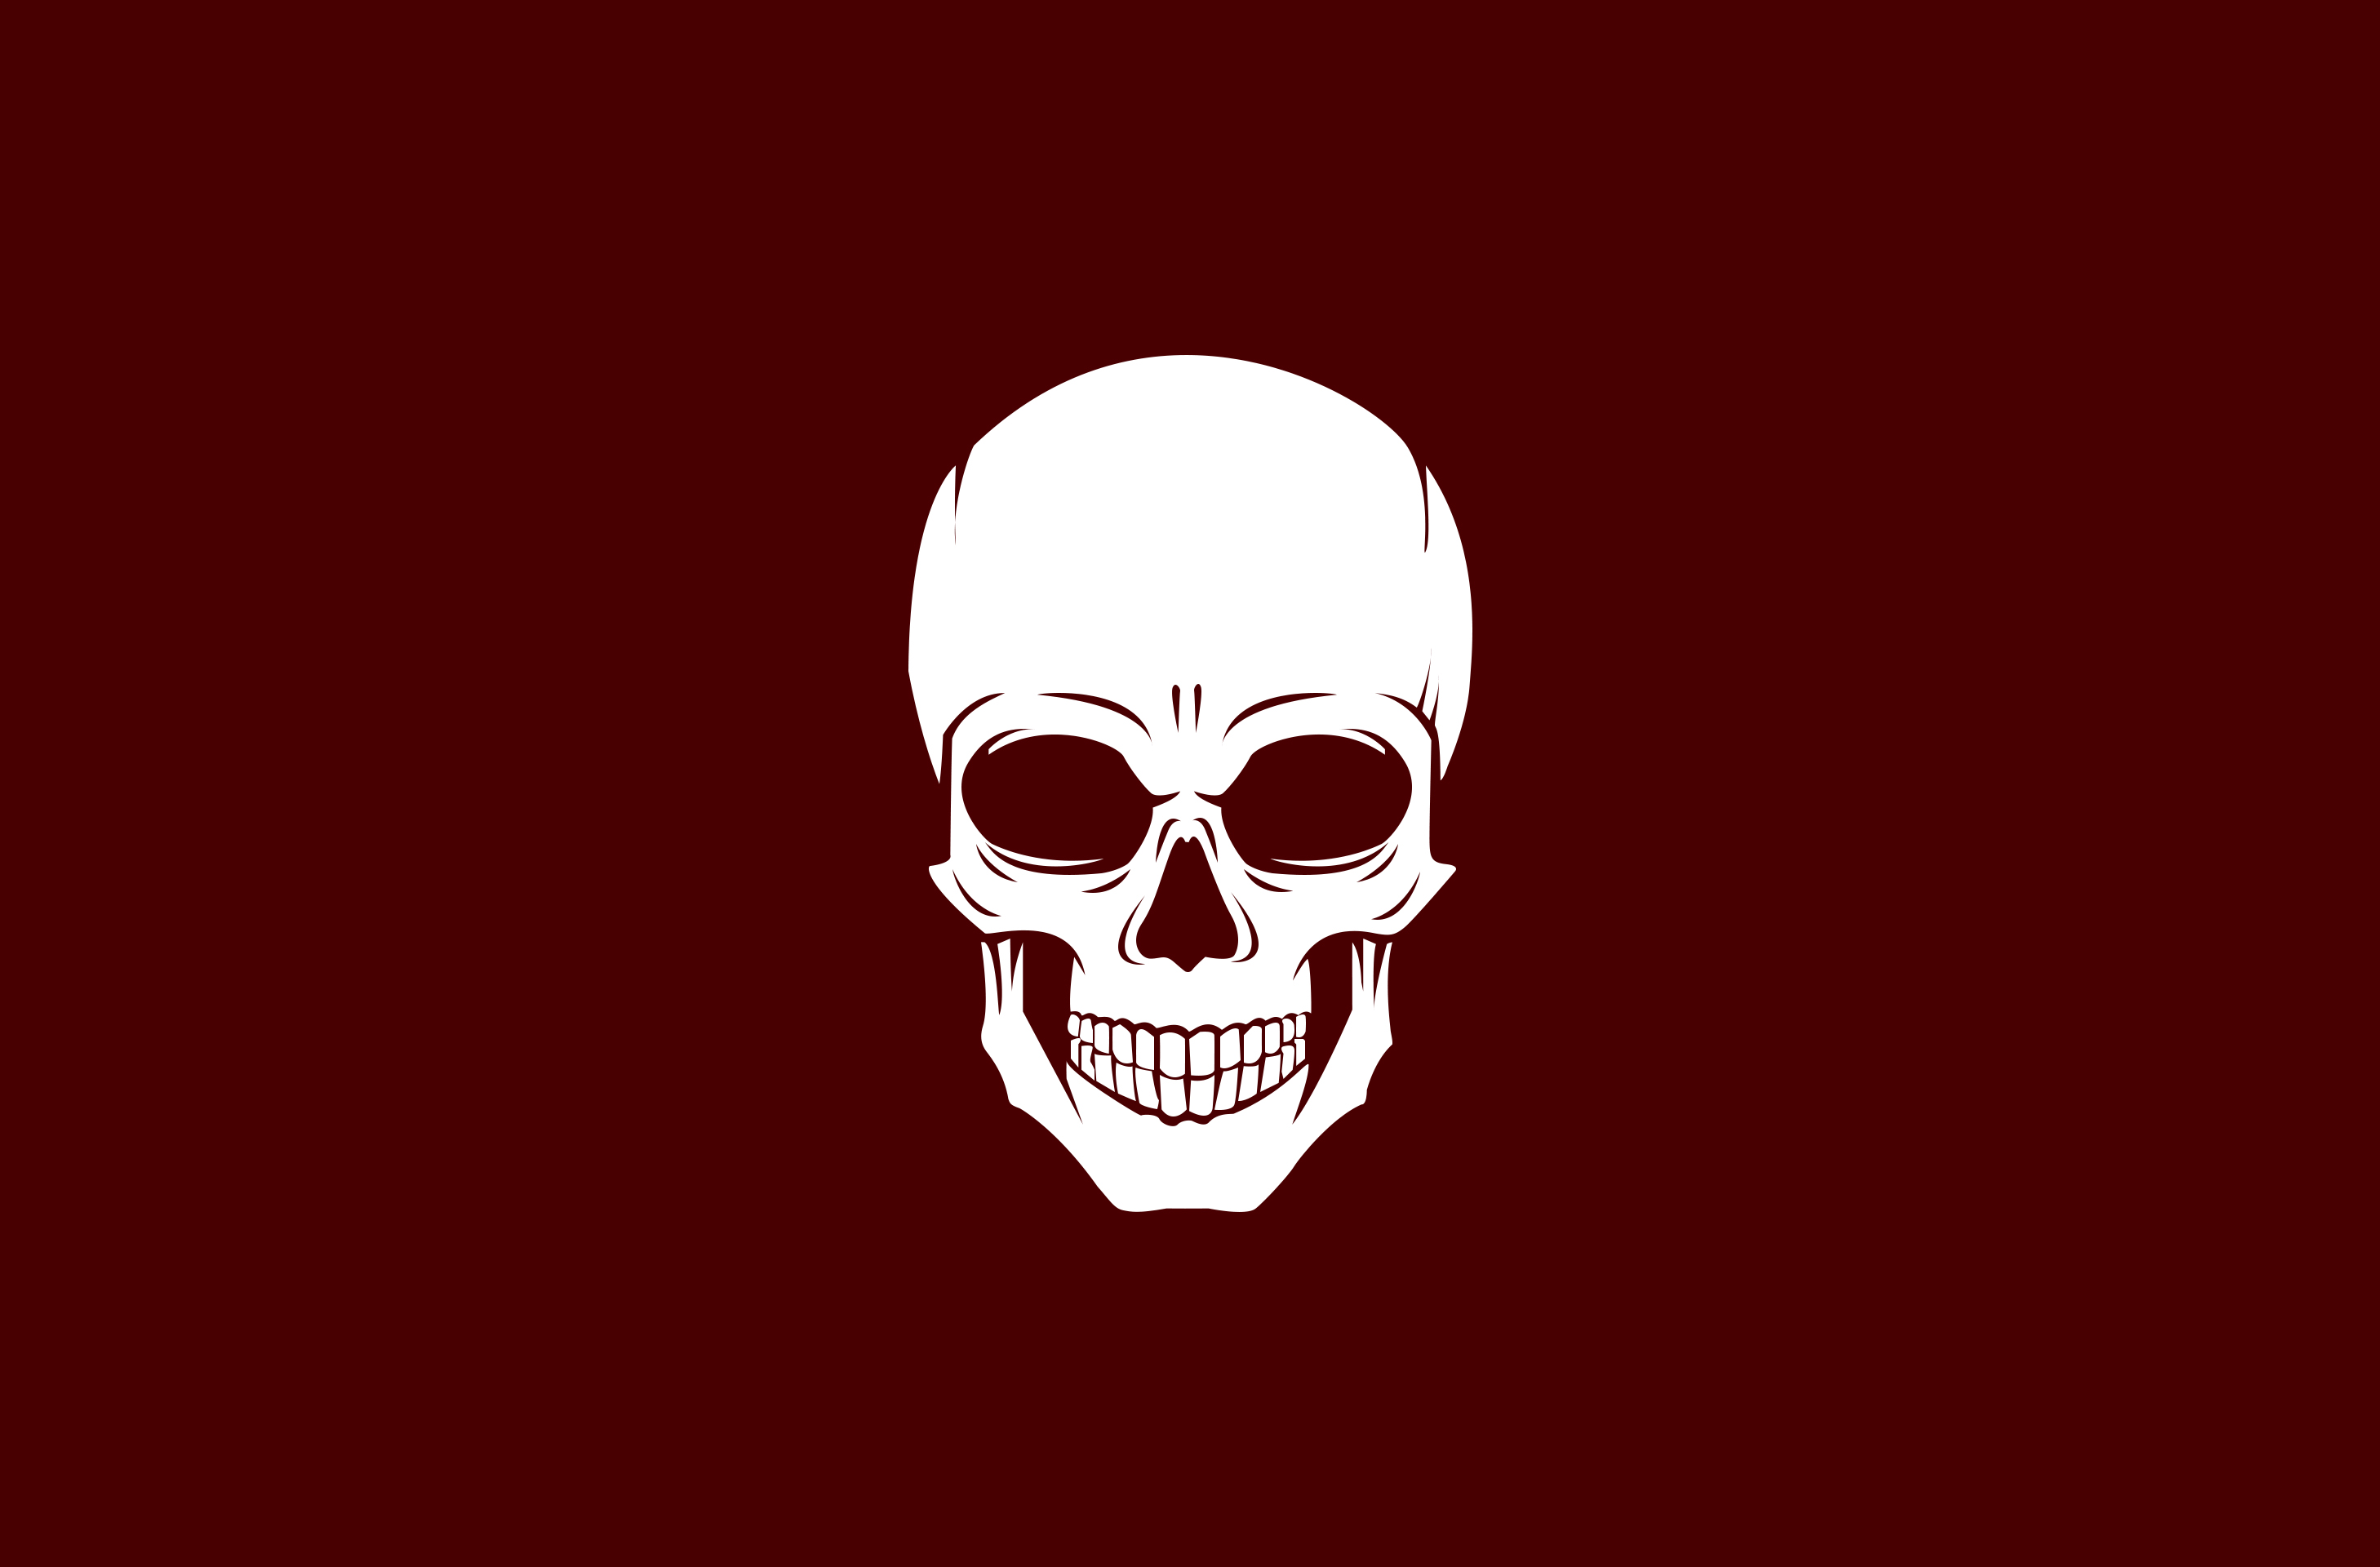 General 2916x1920 red skull red background